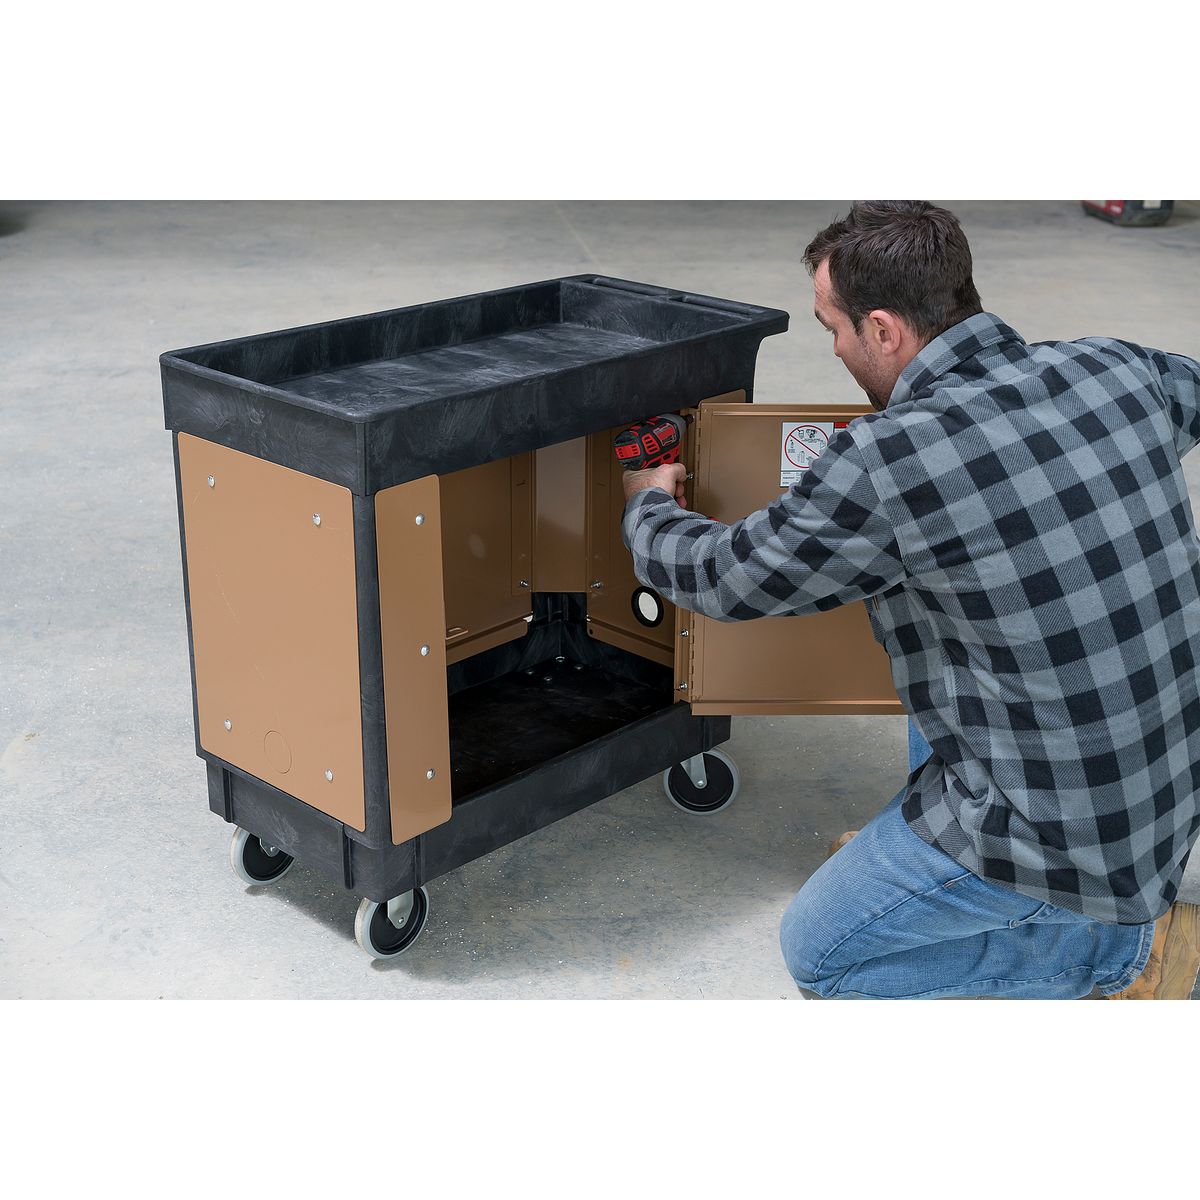 Knaack CA-03 Mobile Cart Security Paneling for sale online